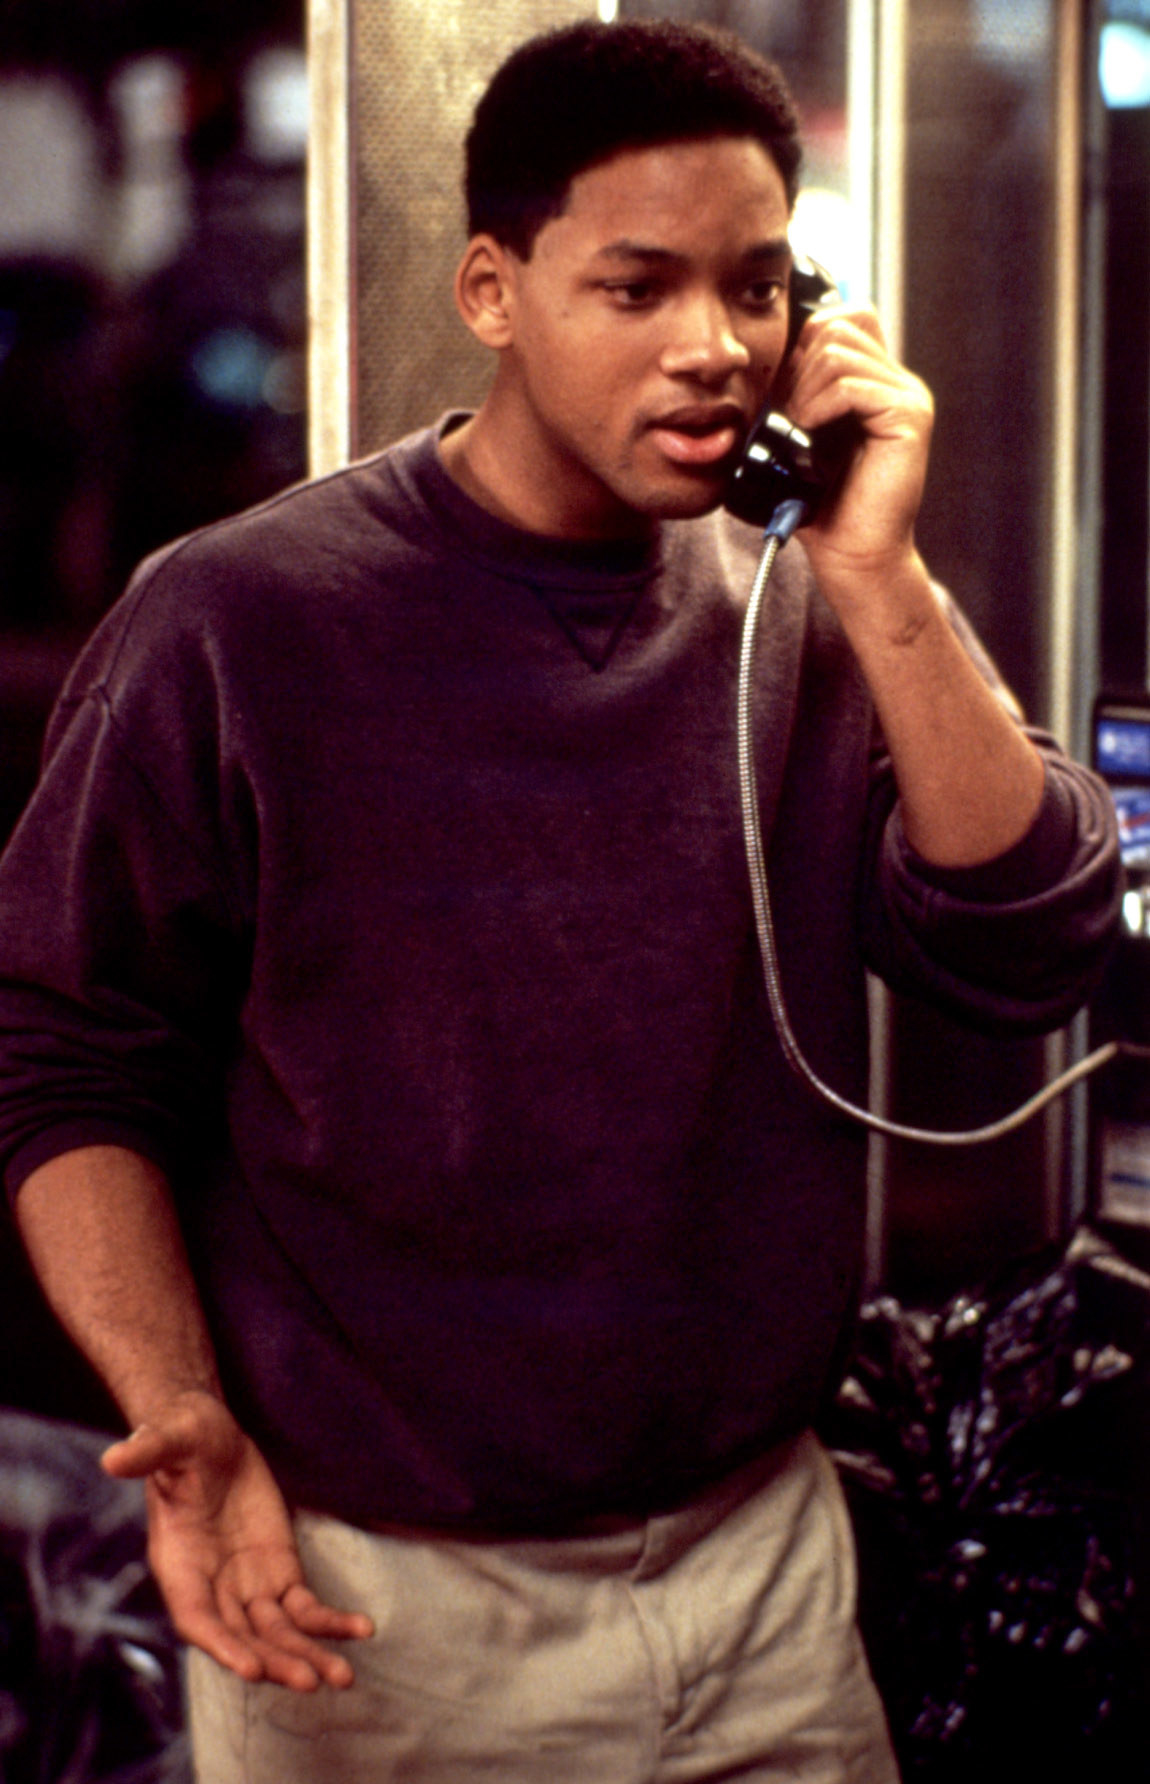 A young Will speaking on a payphone in a scene from Six Degrees of Separation